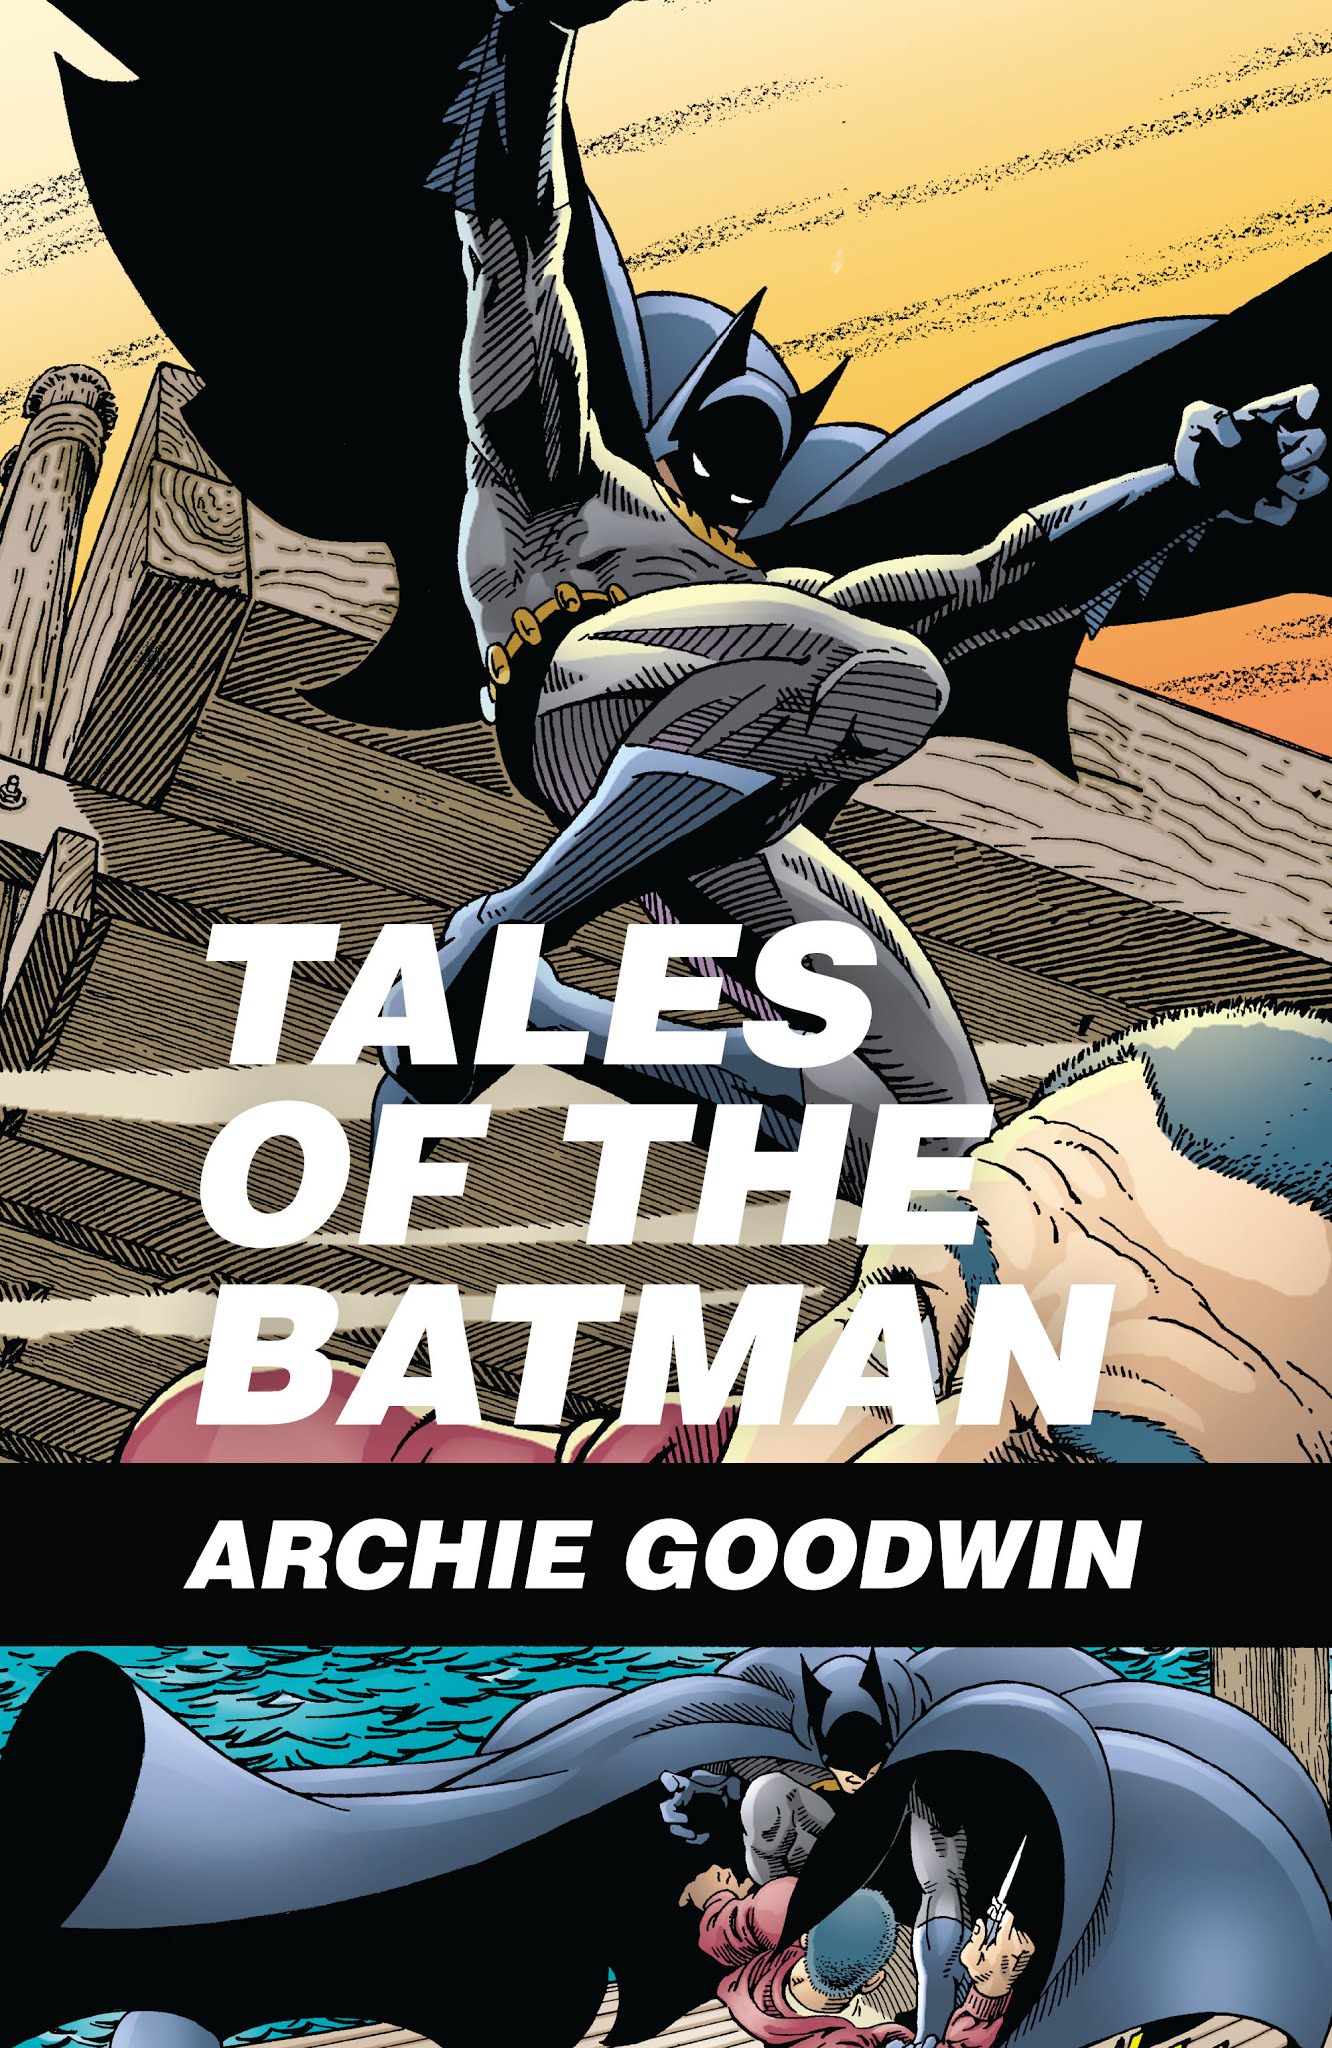 Read online Tales of the Batman: Archie Goodwin comic -  Issue # TPB (Part 1) - 2